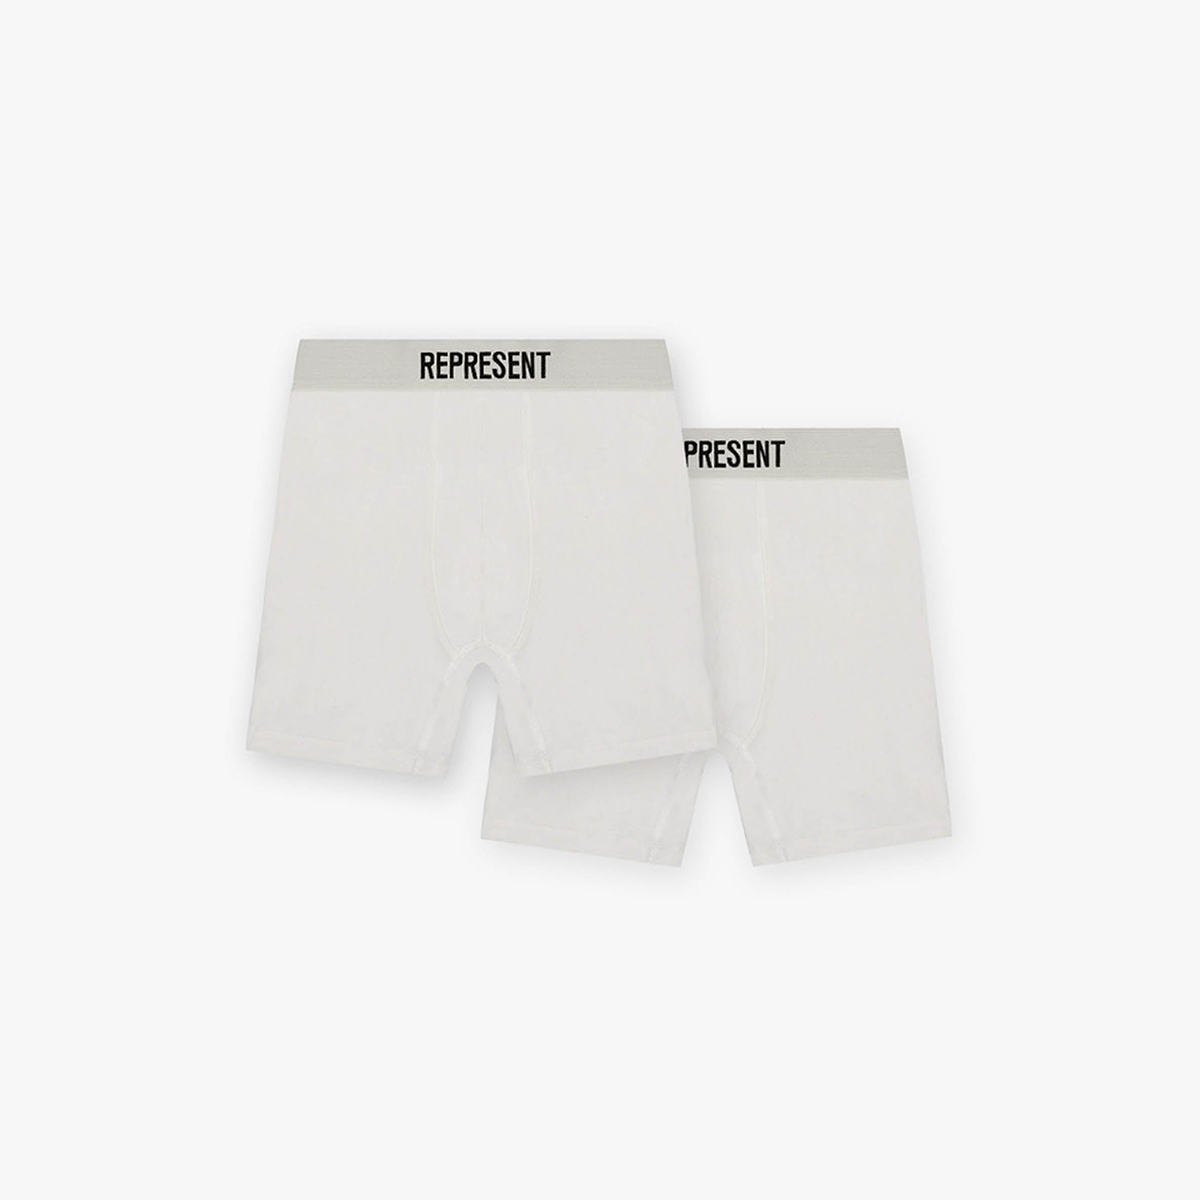 Flat White Boxers, 2 Pack